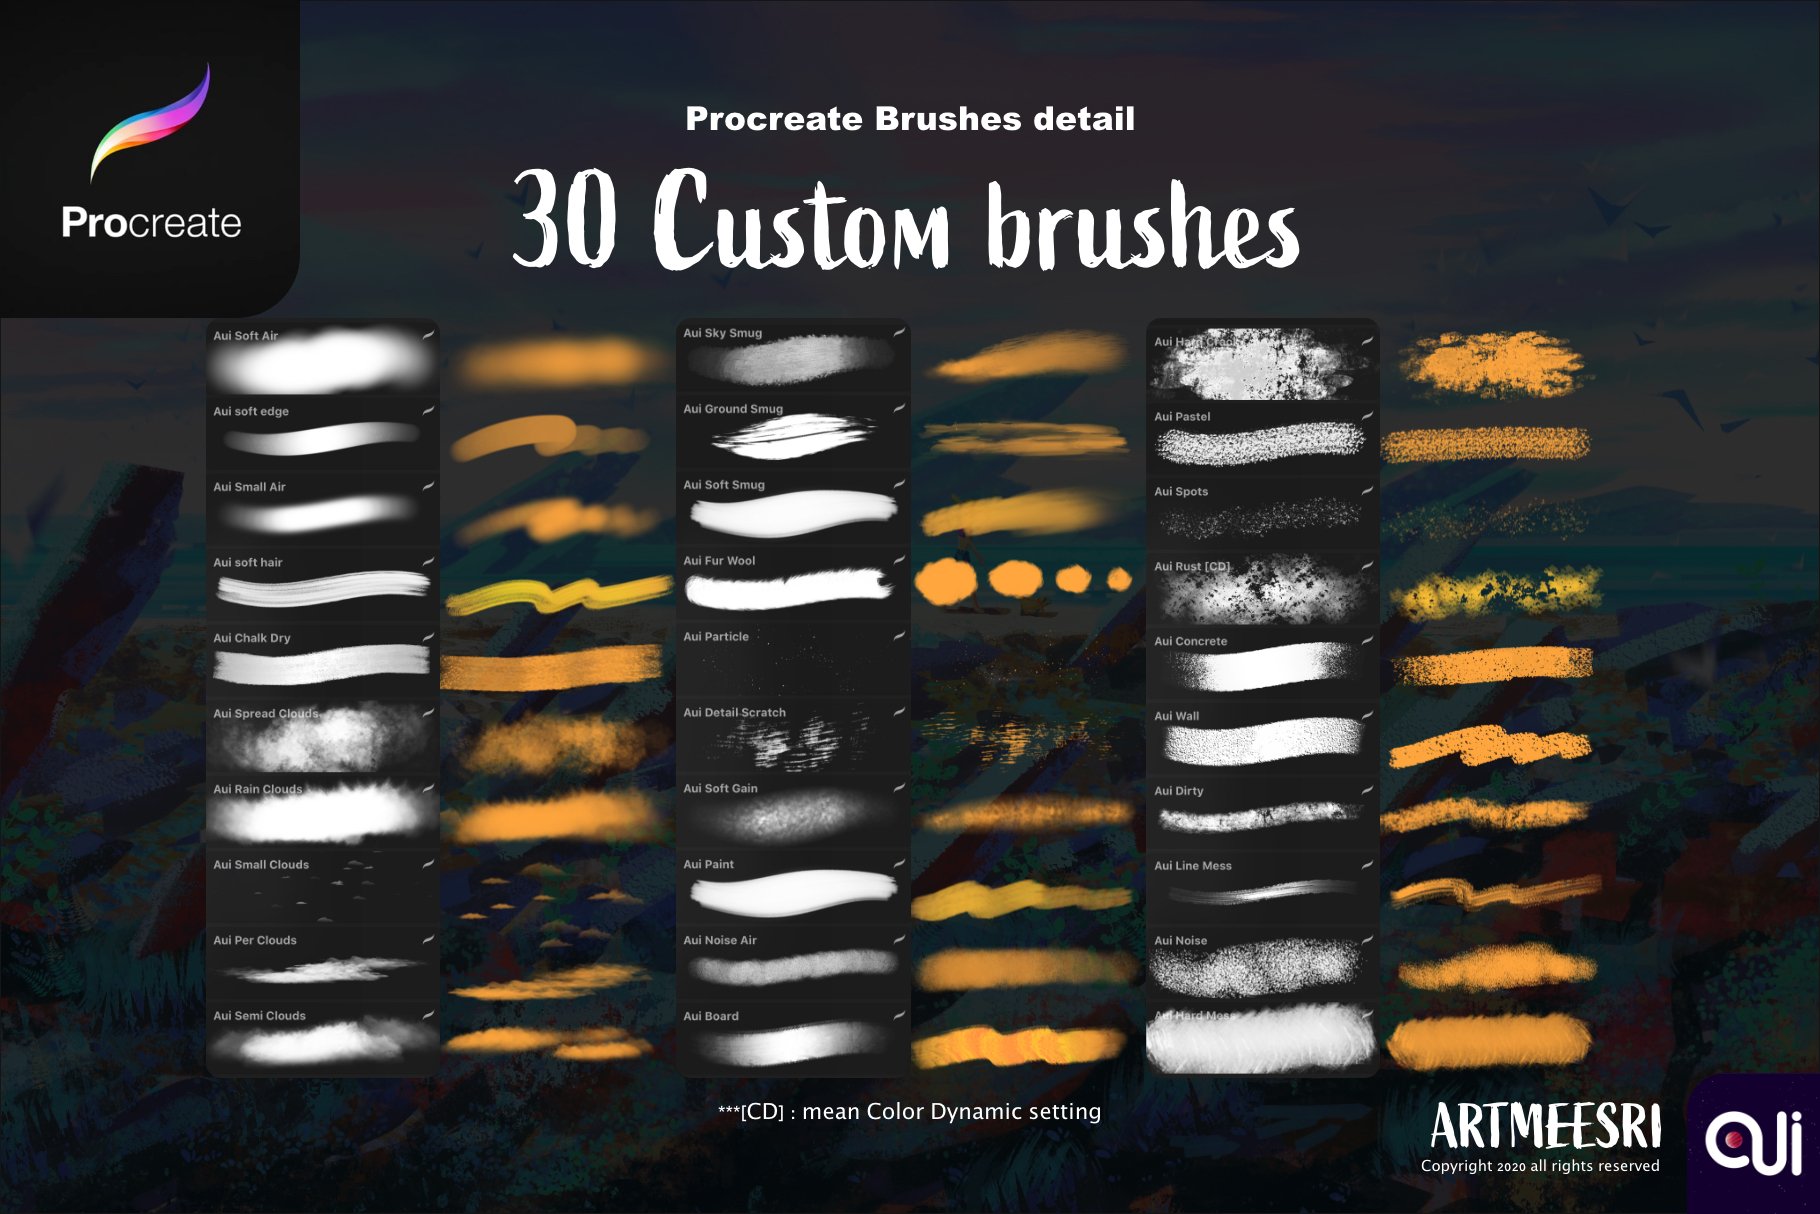 Procreate Brushes set : Paintingpreview image.